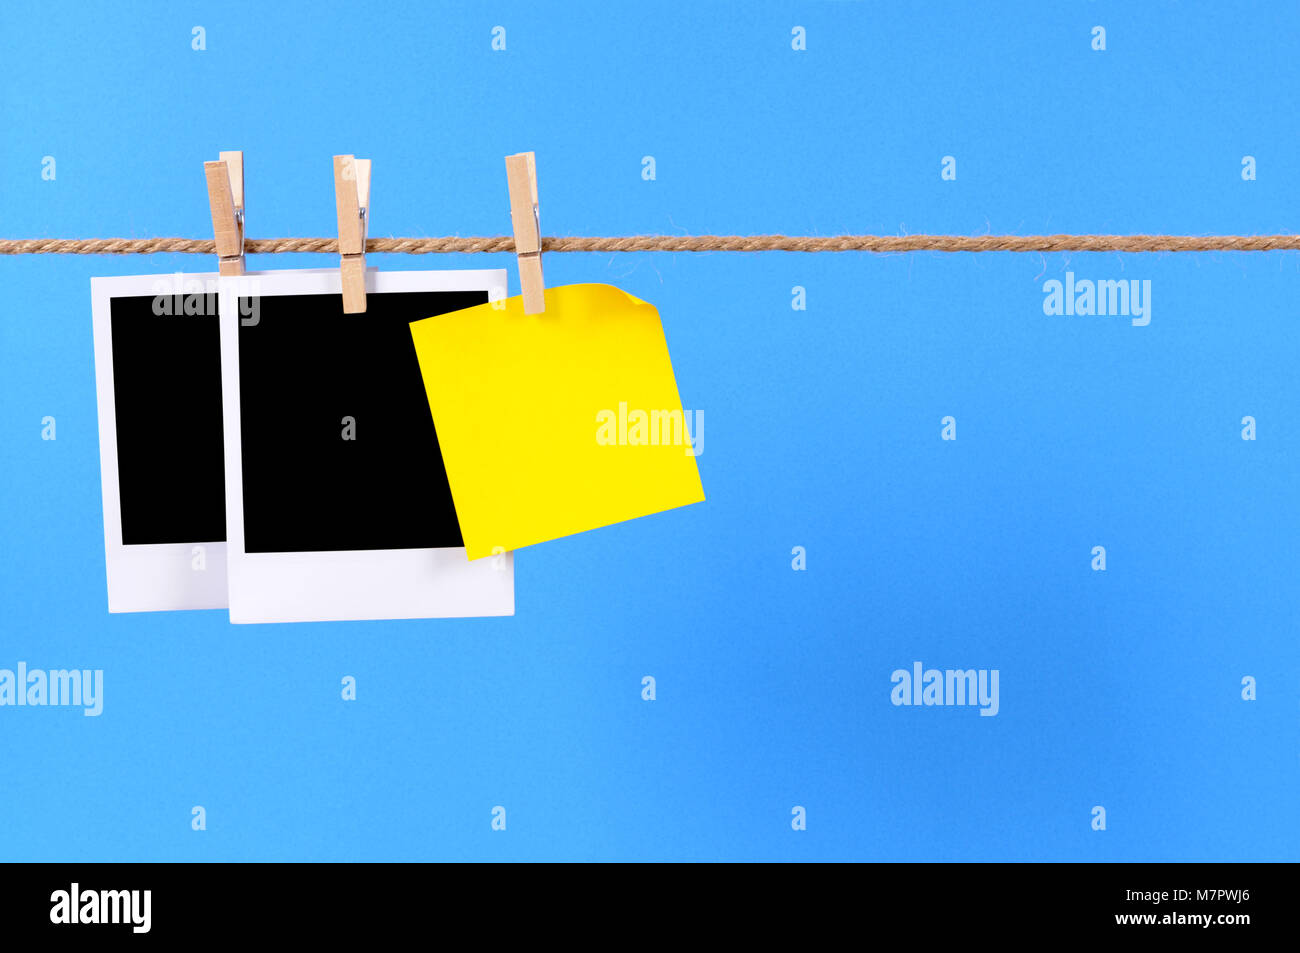 Blank instant camera photo prints and an office sticky note hanging on a rope or string isolated against a blue background.  Space for copy. Stock Photo